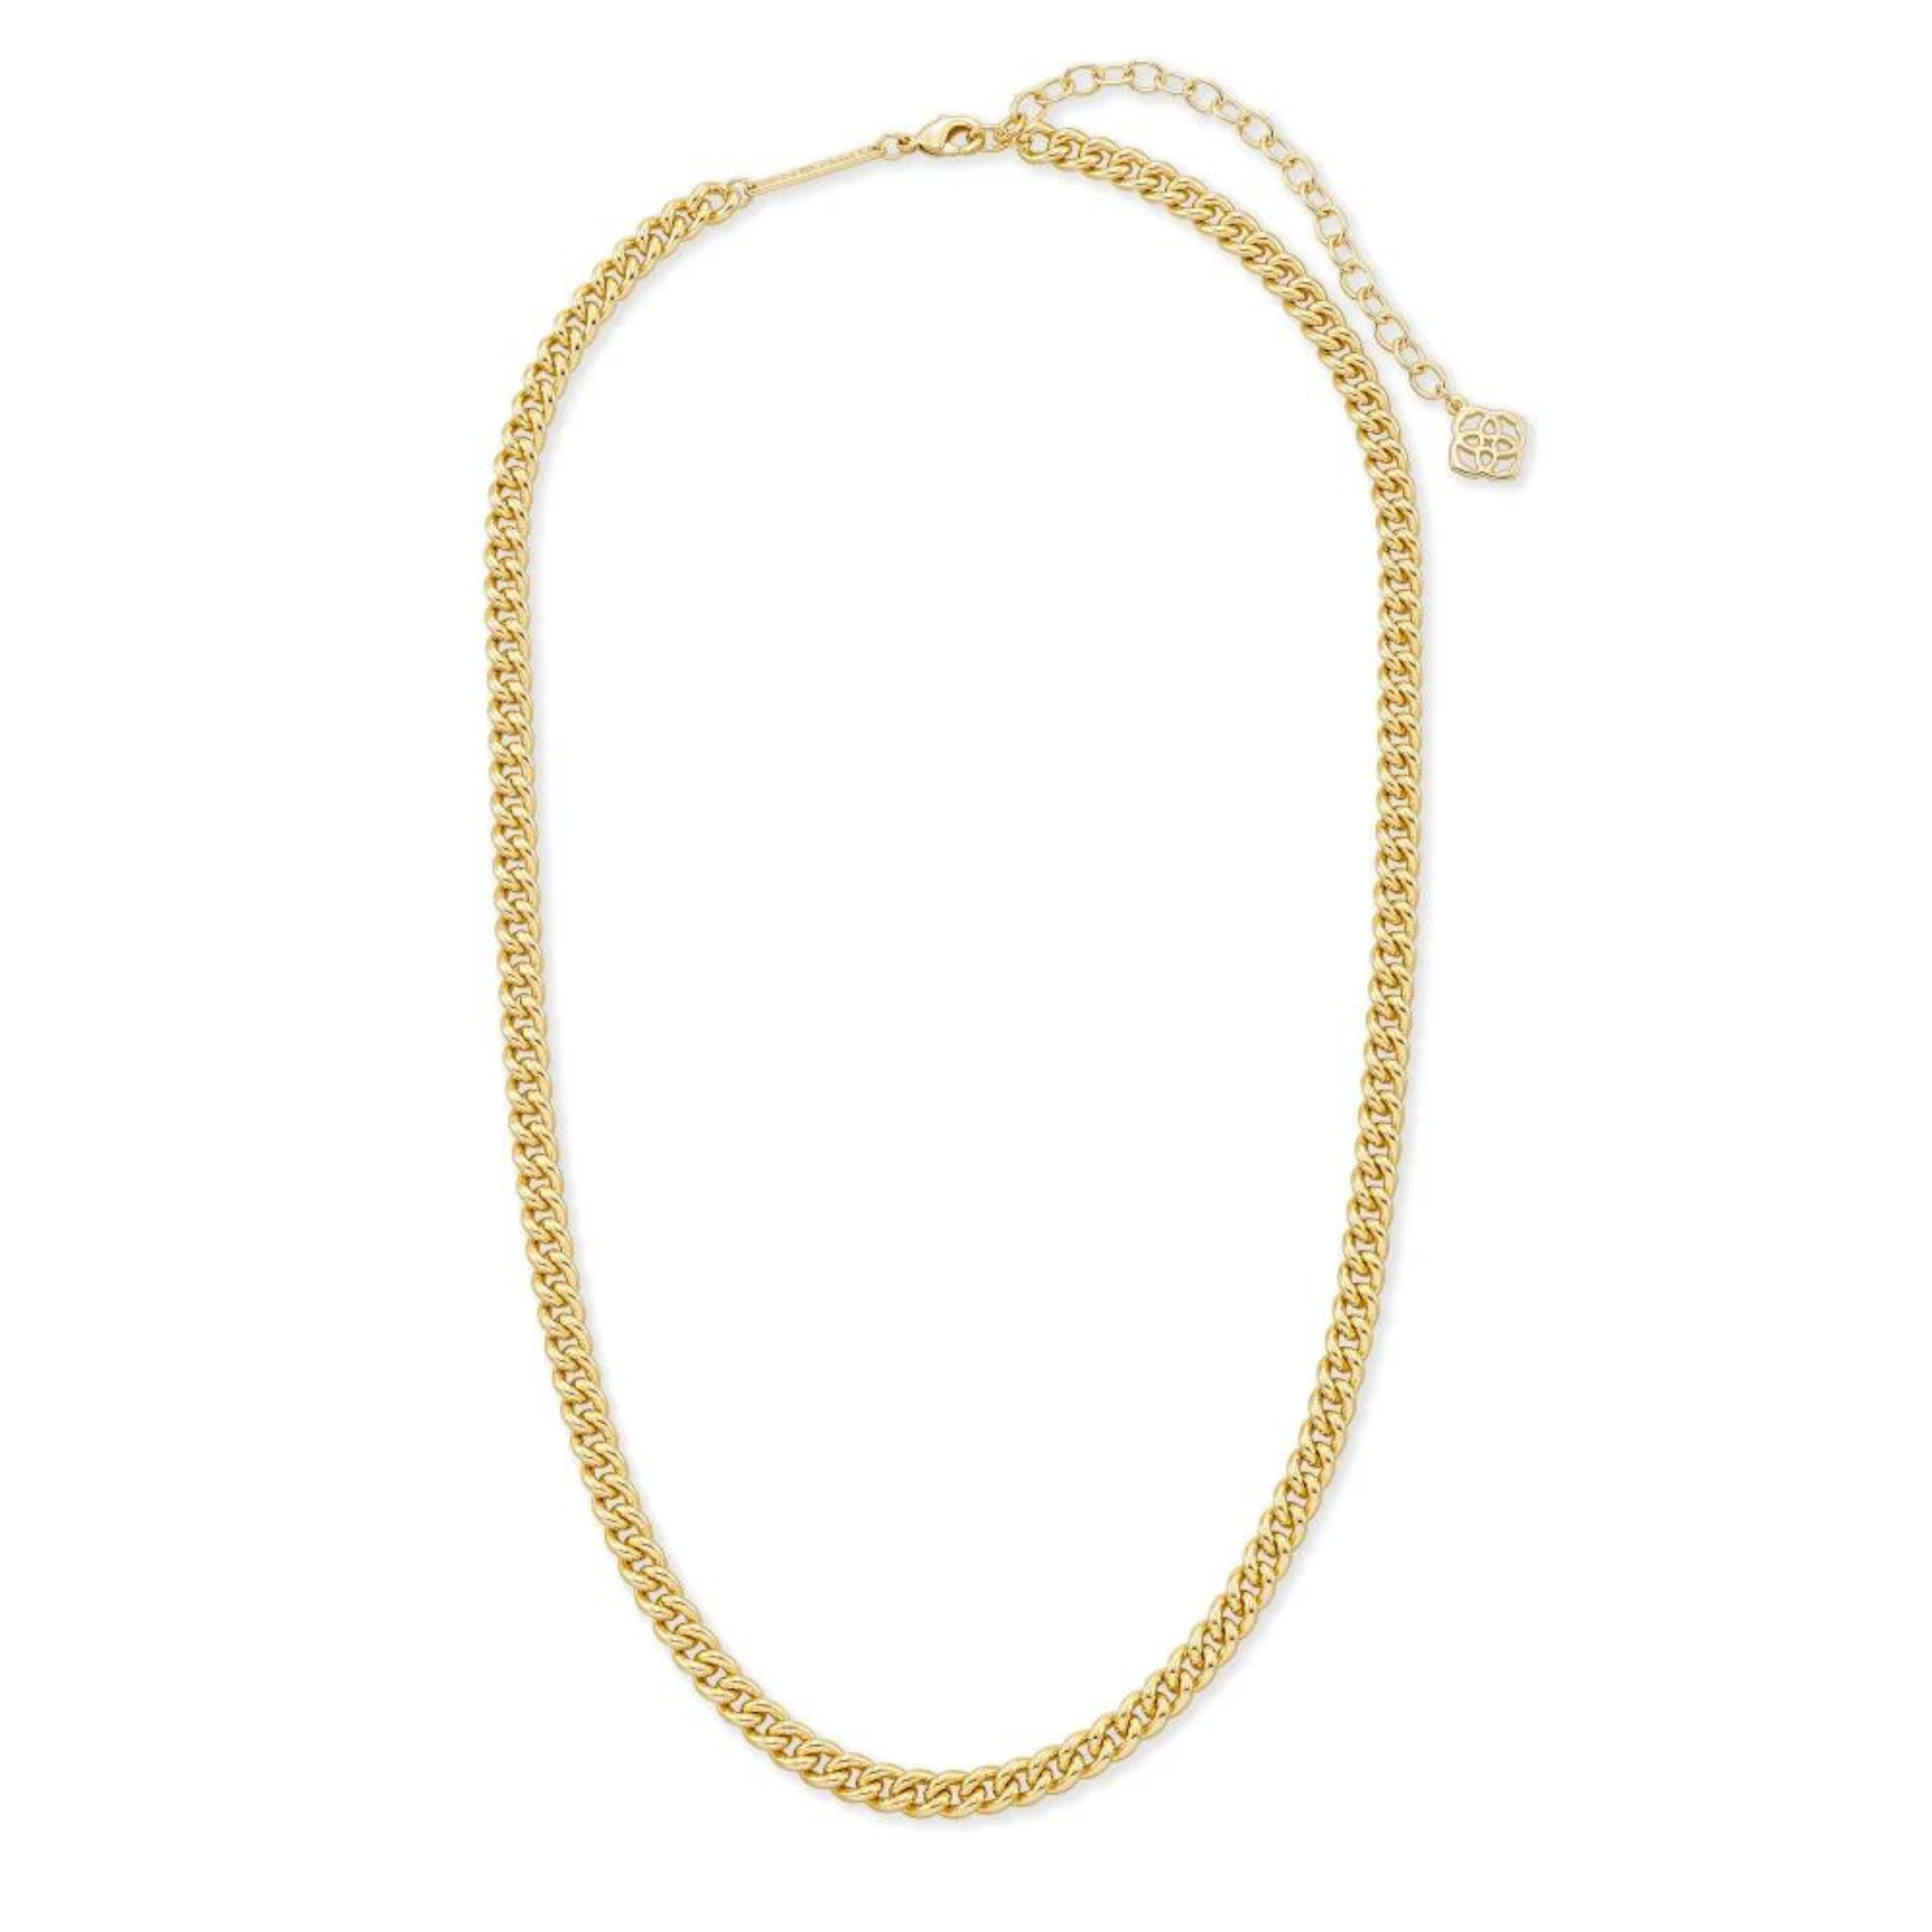 Kendra Scott | Ace Chain Necklace in Gold - Giddy Up Glamour Boutique